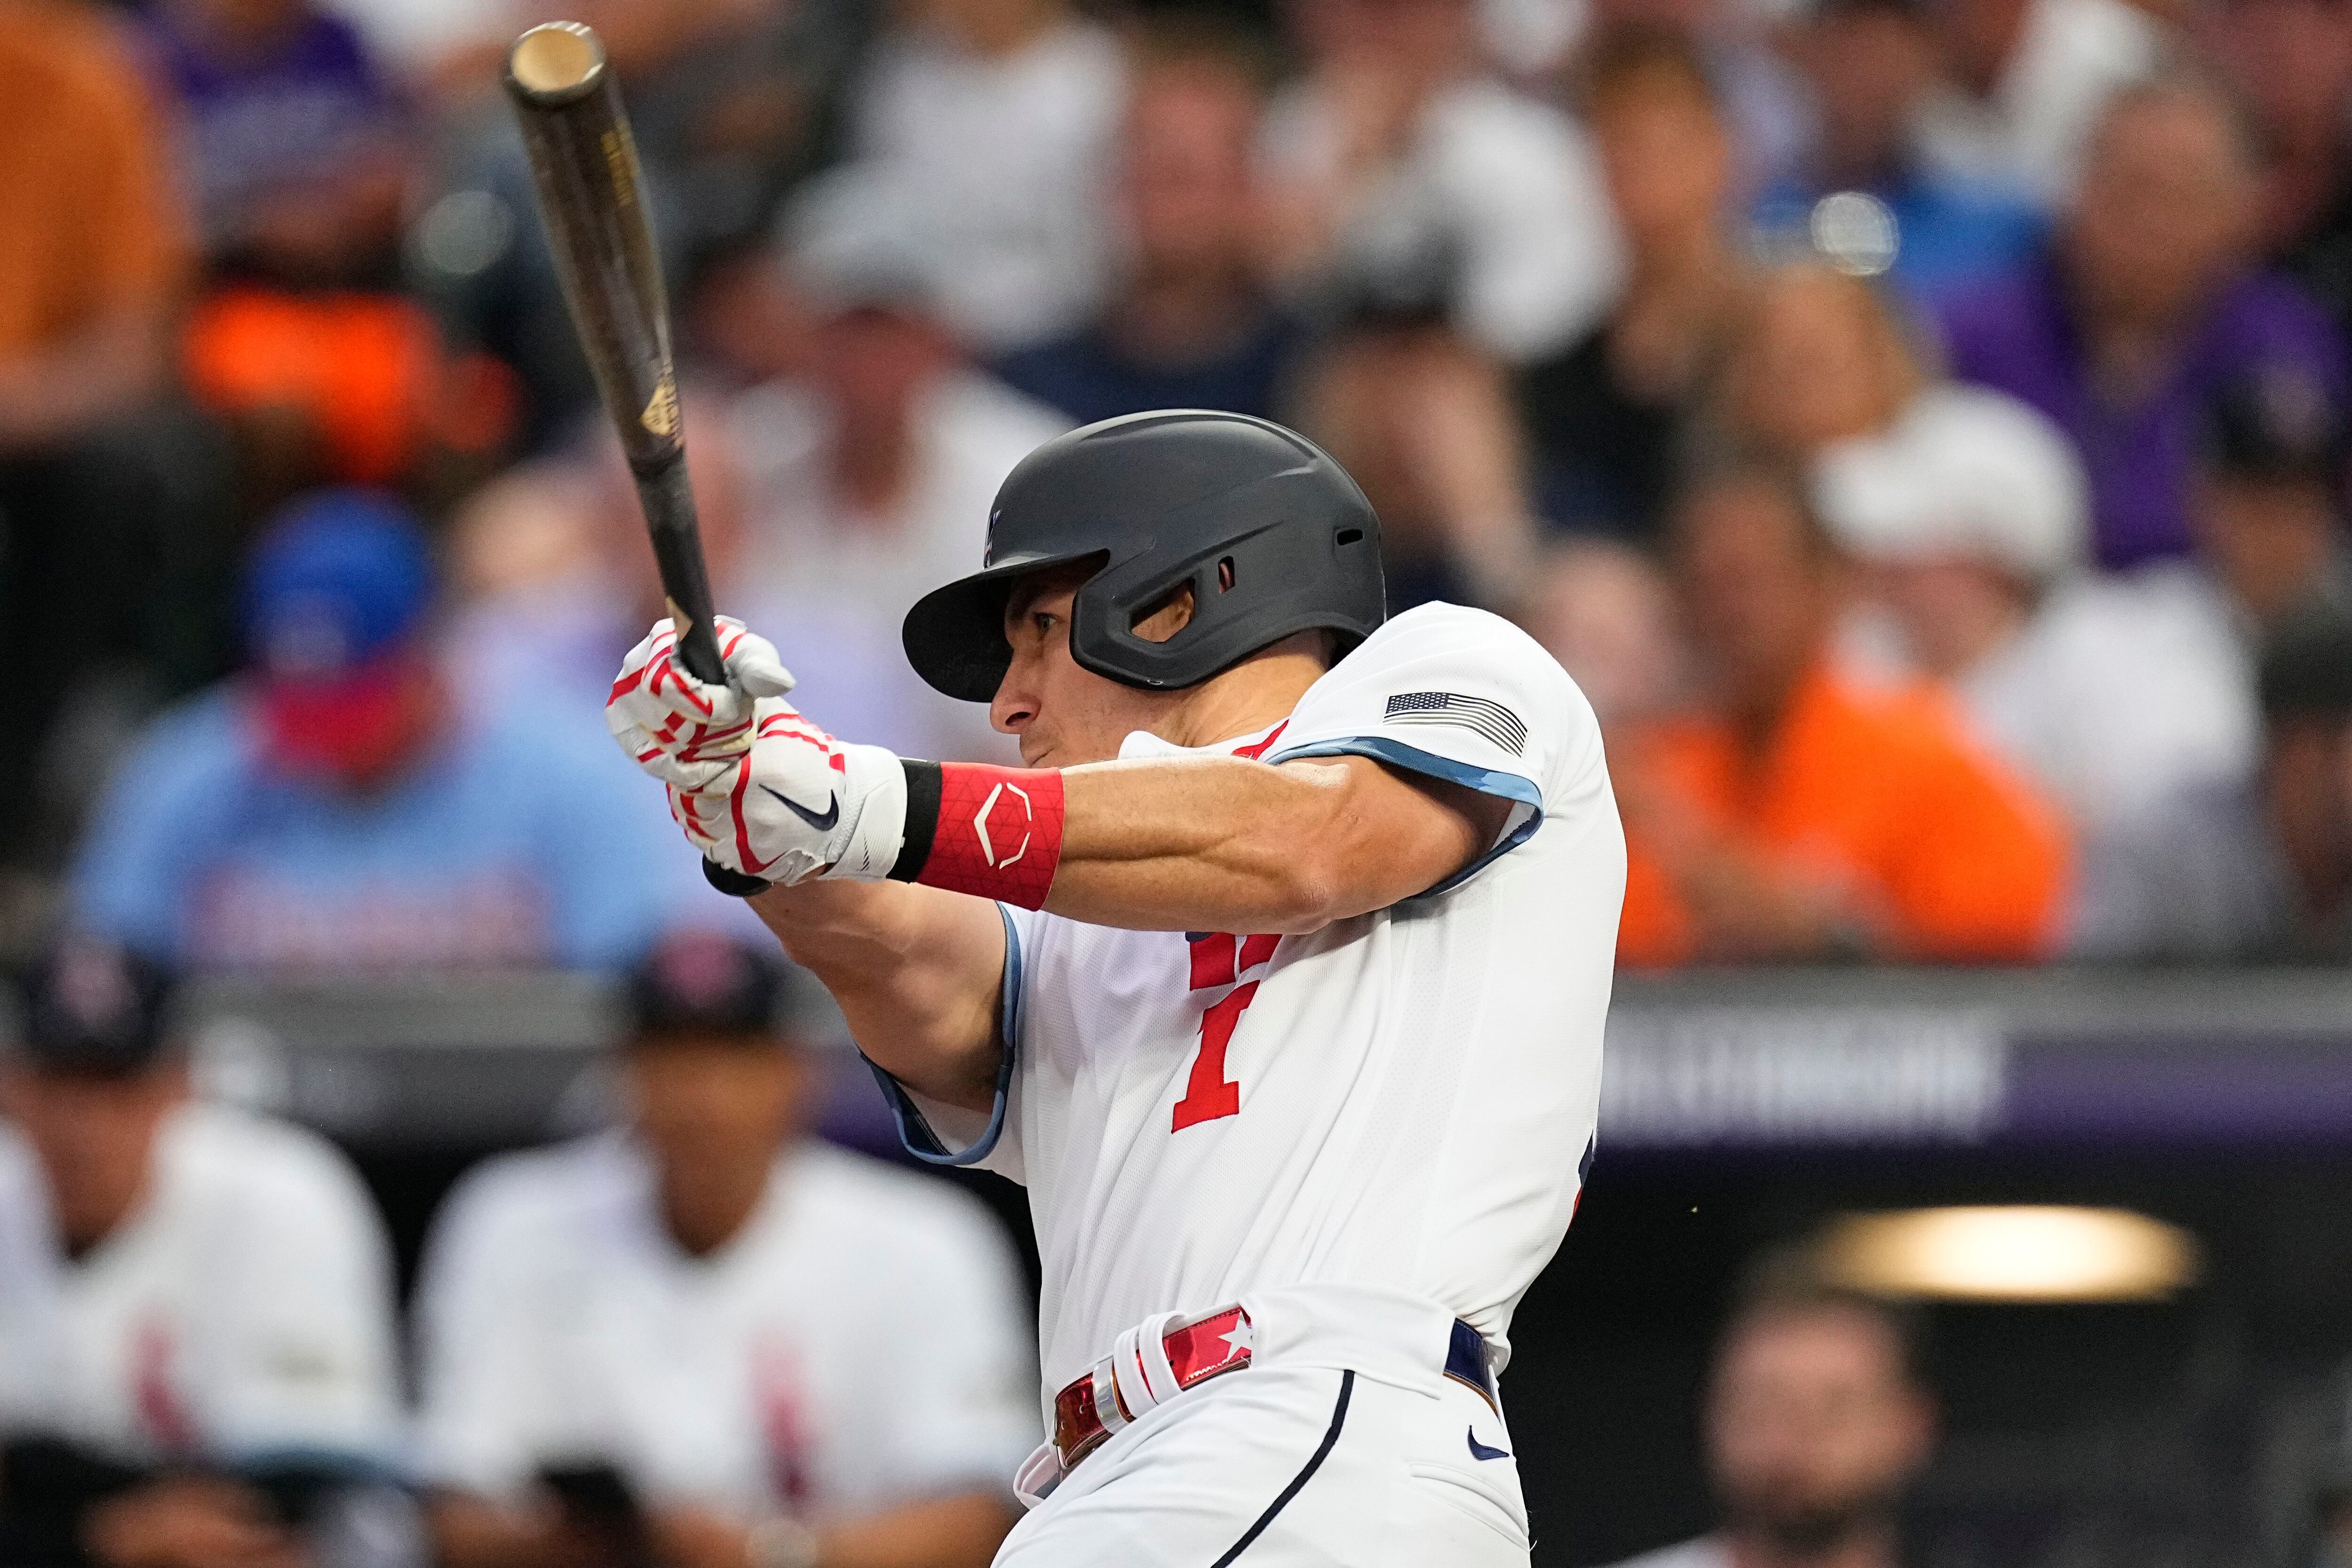 Red Sox Shine in All-Star Game, Road Ahead